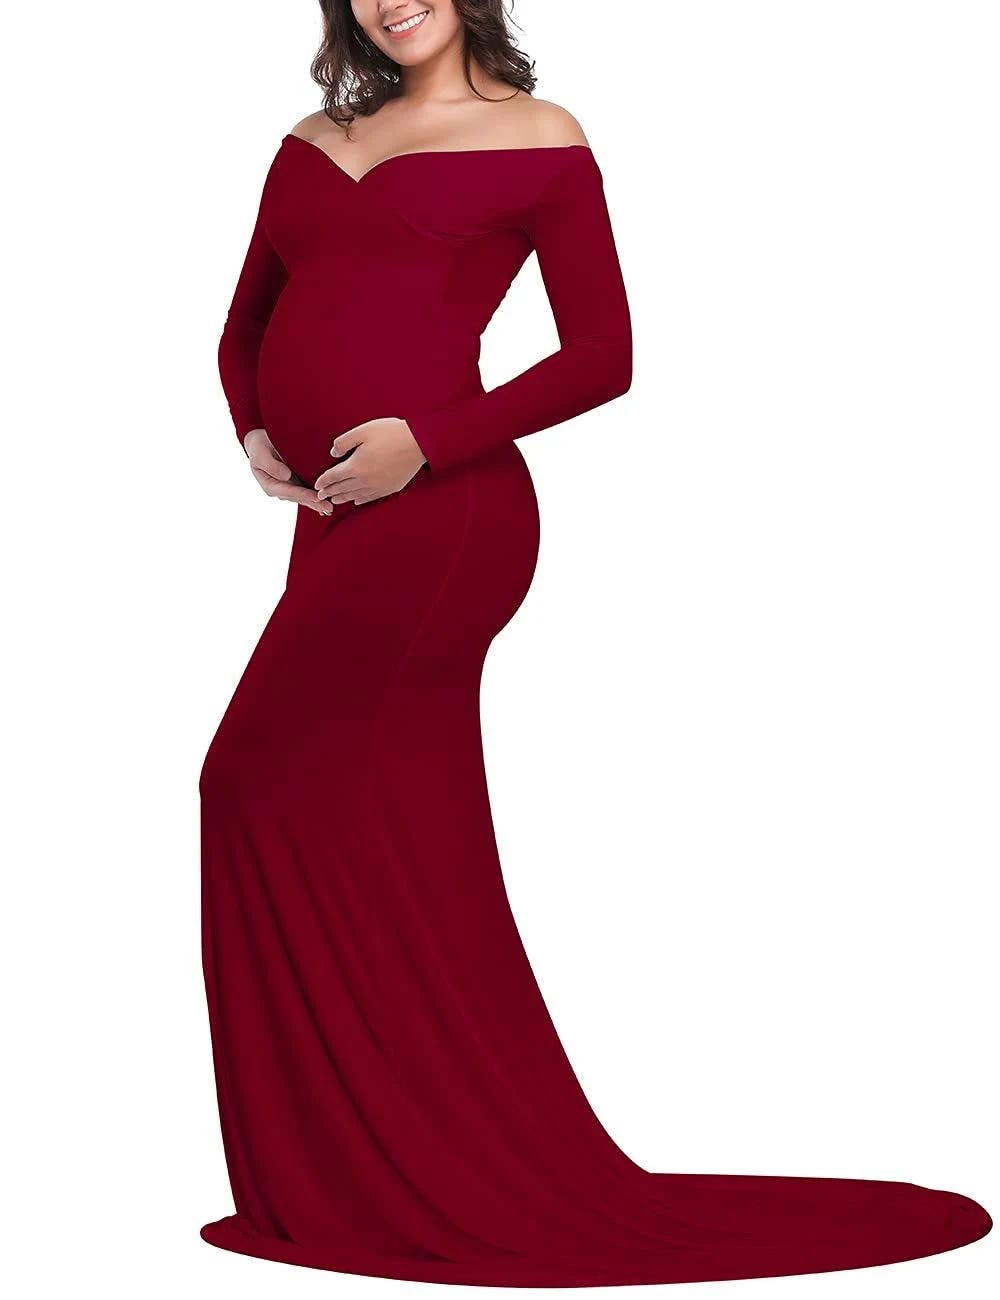 Red Maternity Maxi Dress with Long Sleeves | Image